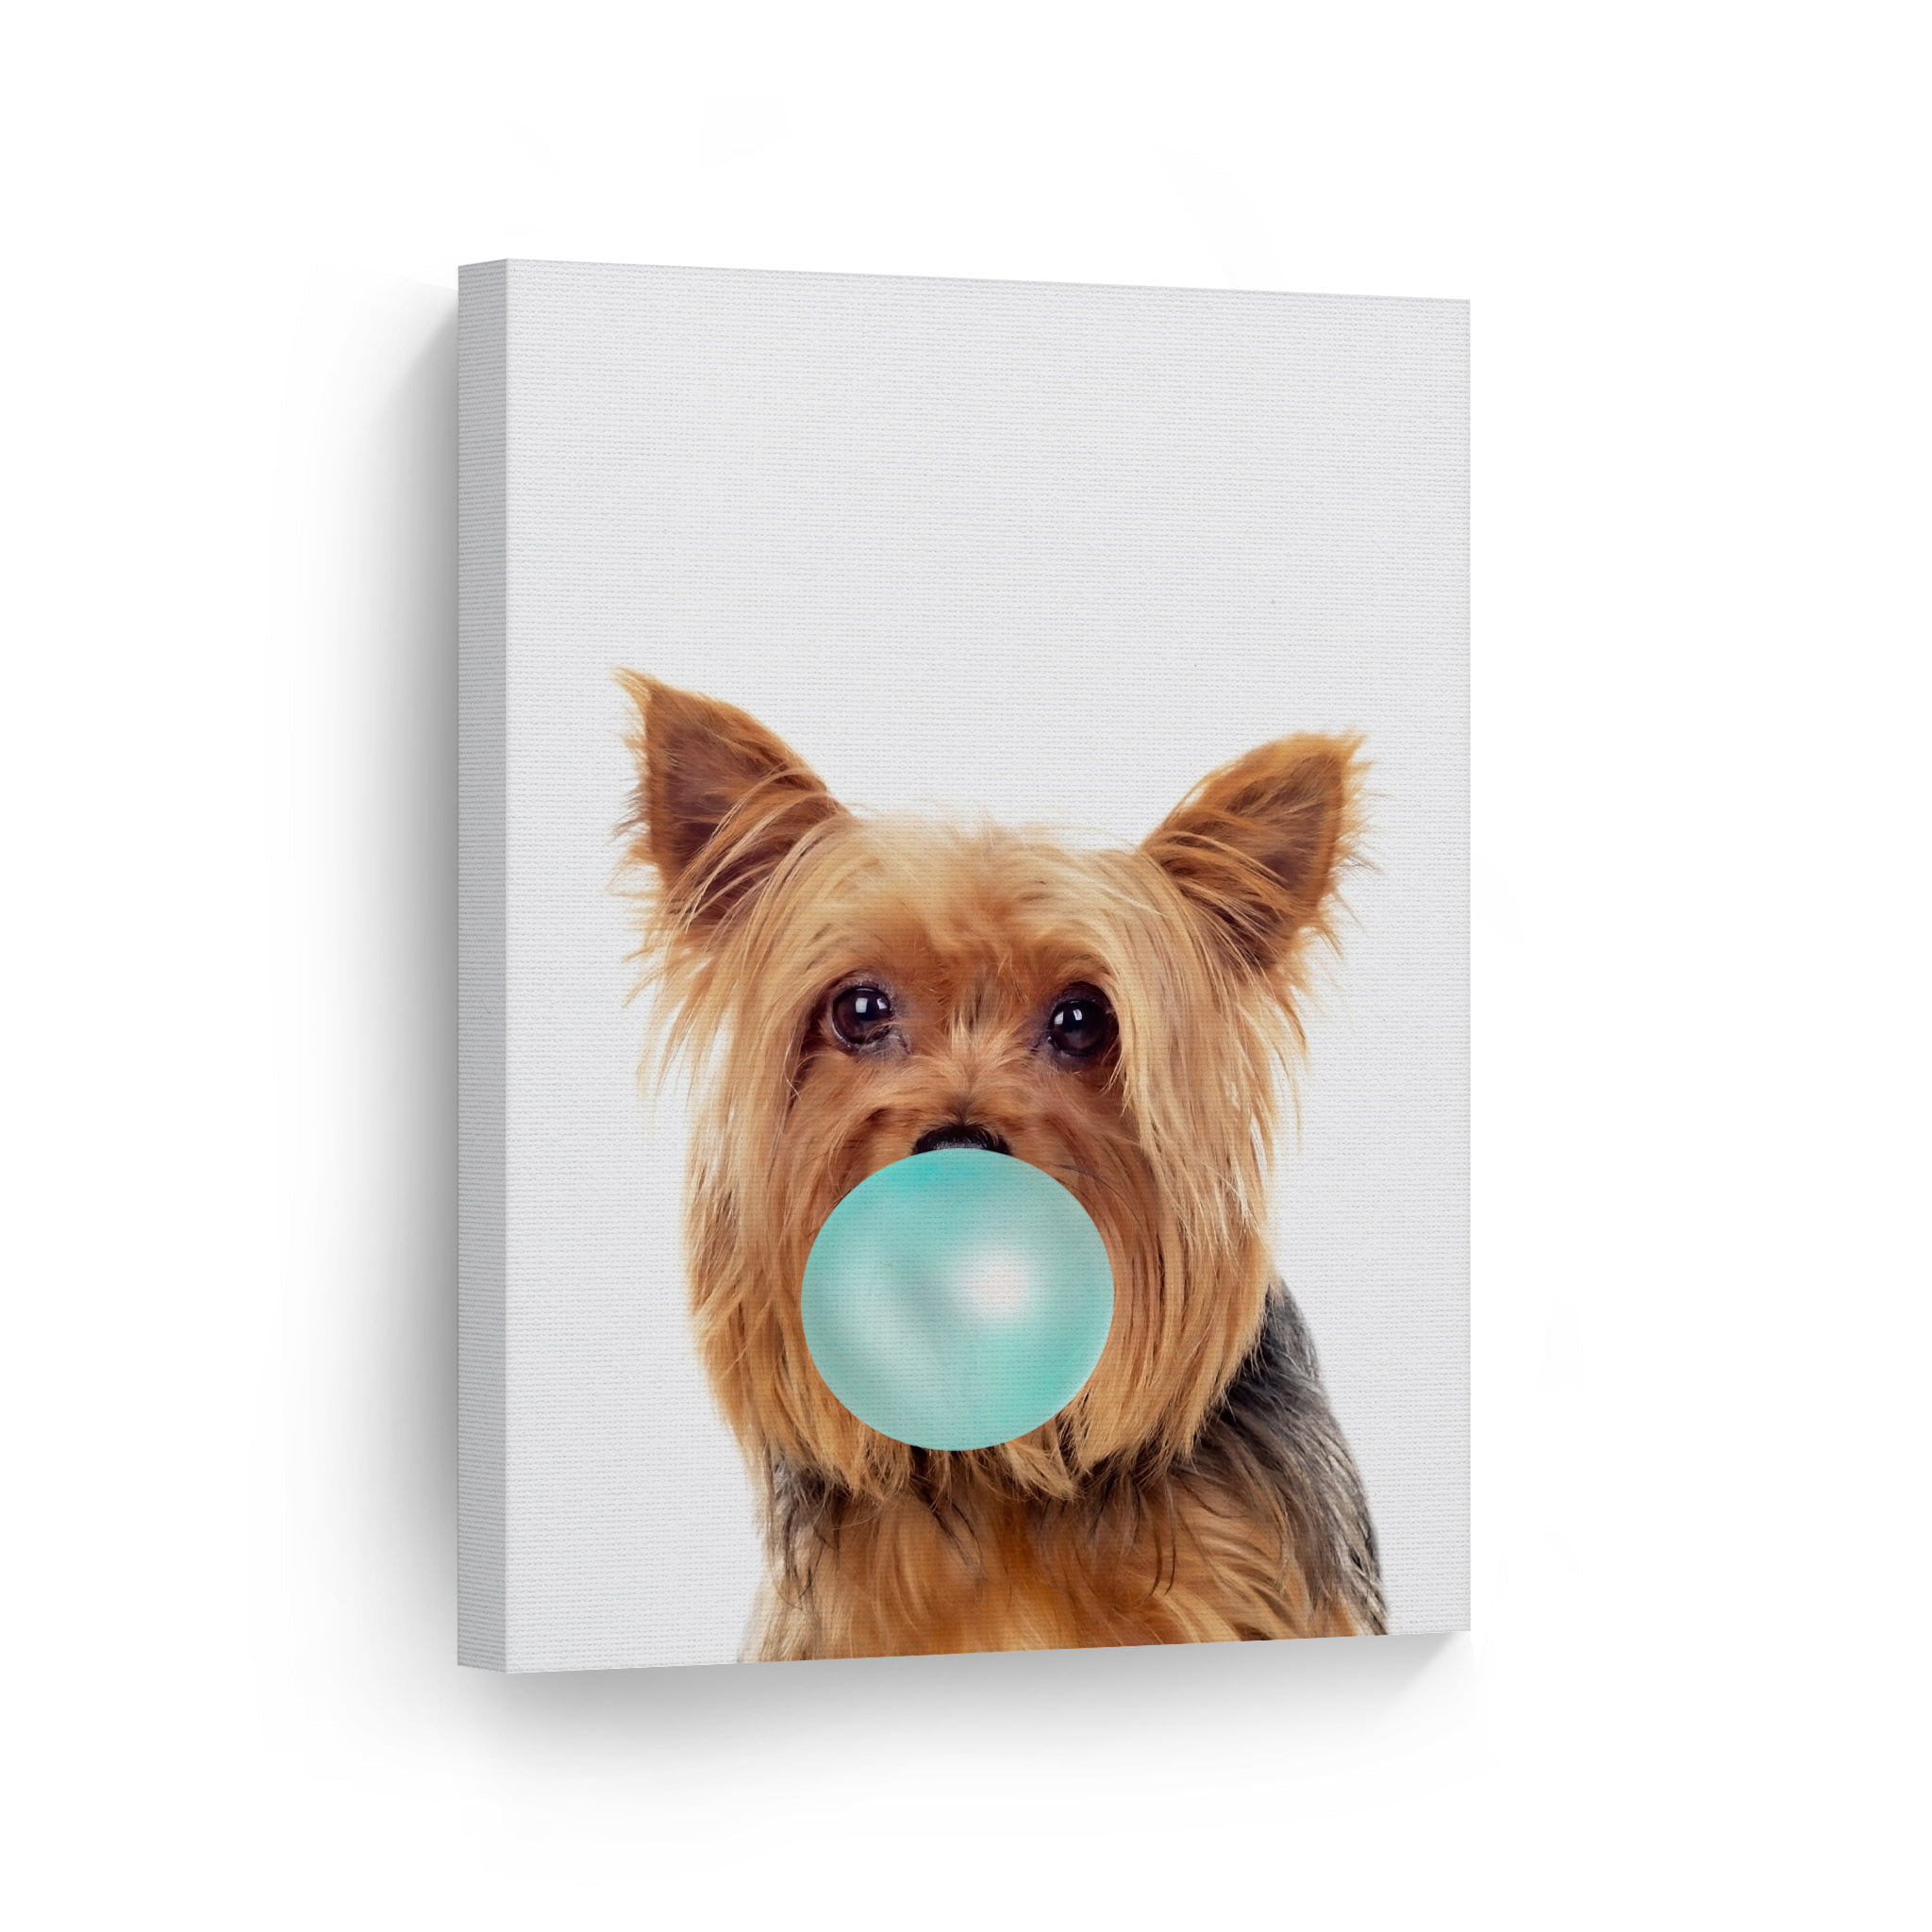 YORKSHIRE TERRIER 'YORKIE' DOG LOVER NOVELTY GIFT FOR YOUR CAR REAR WIPER 